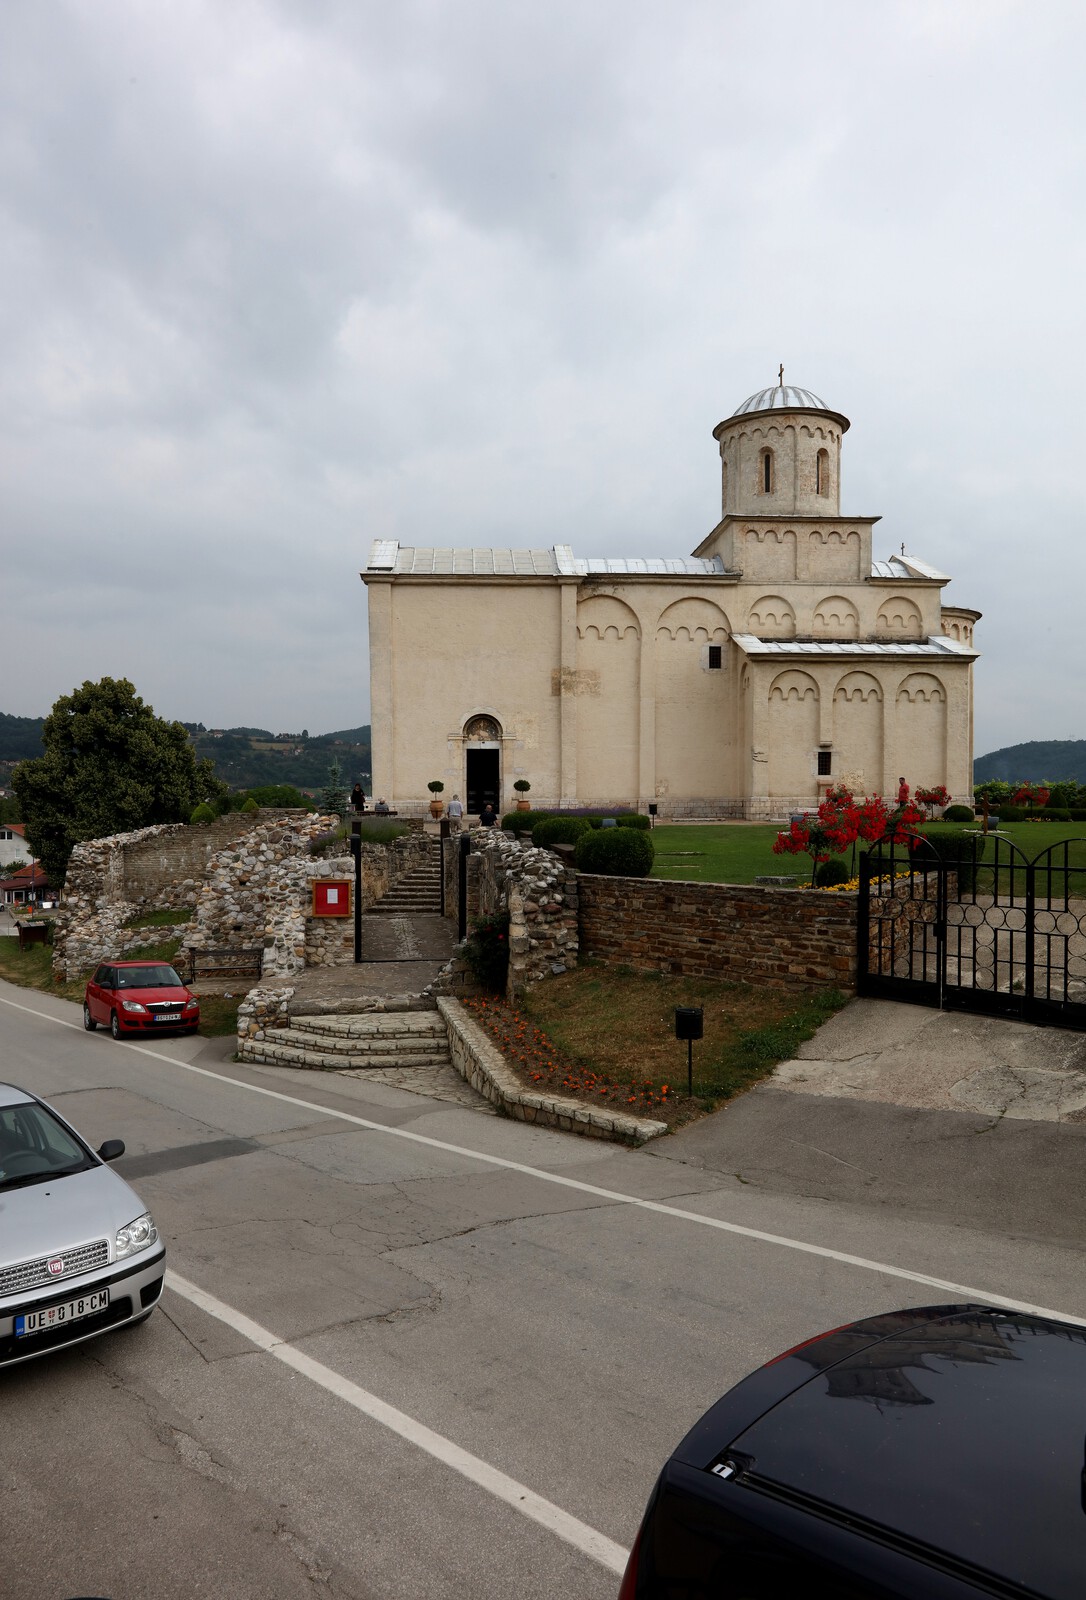 Approach and the south side of the Arilje church